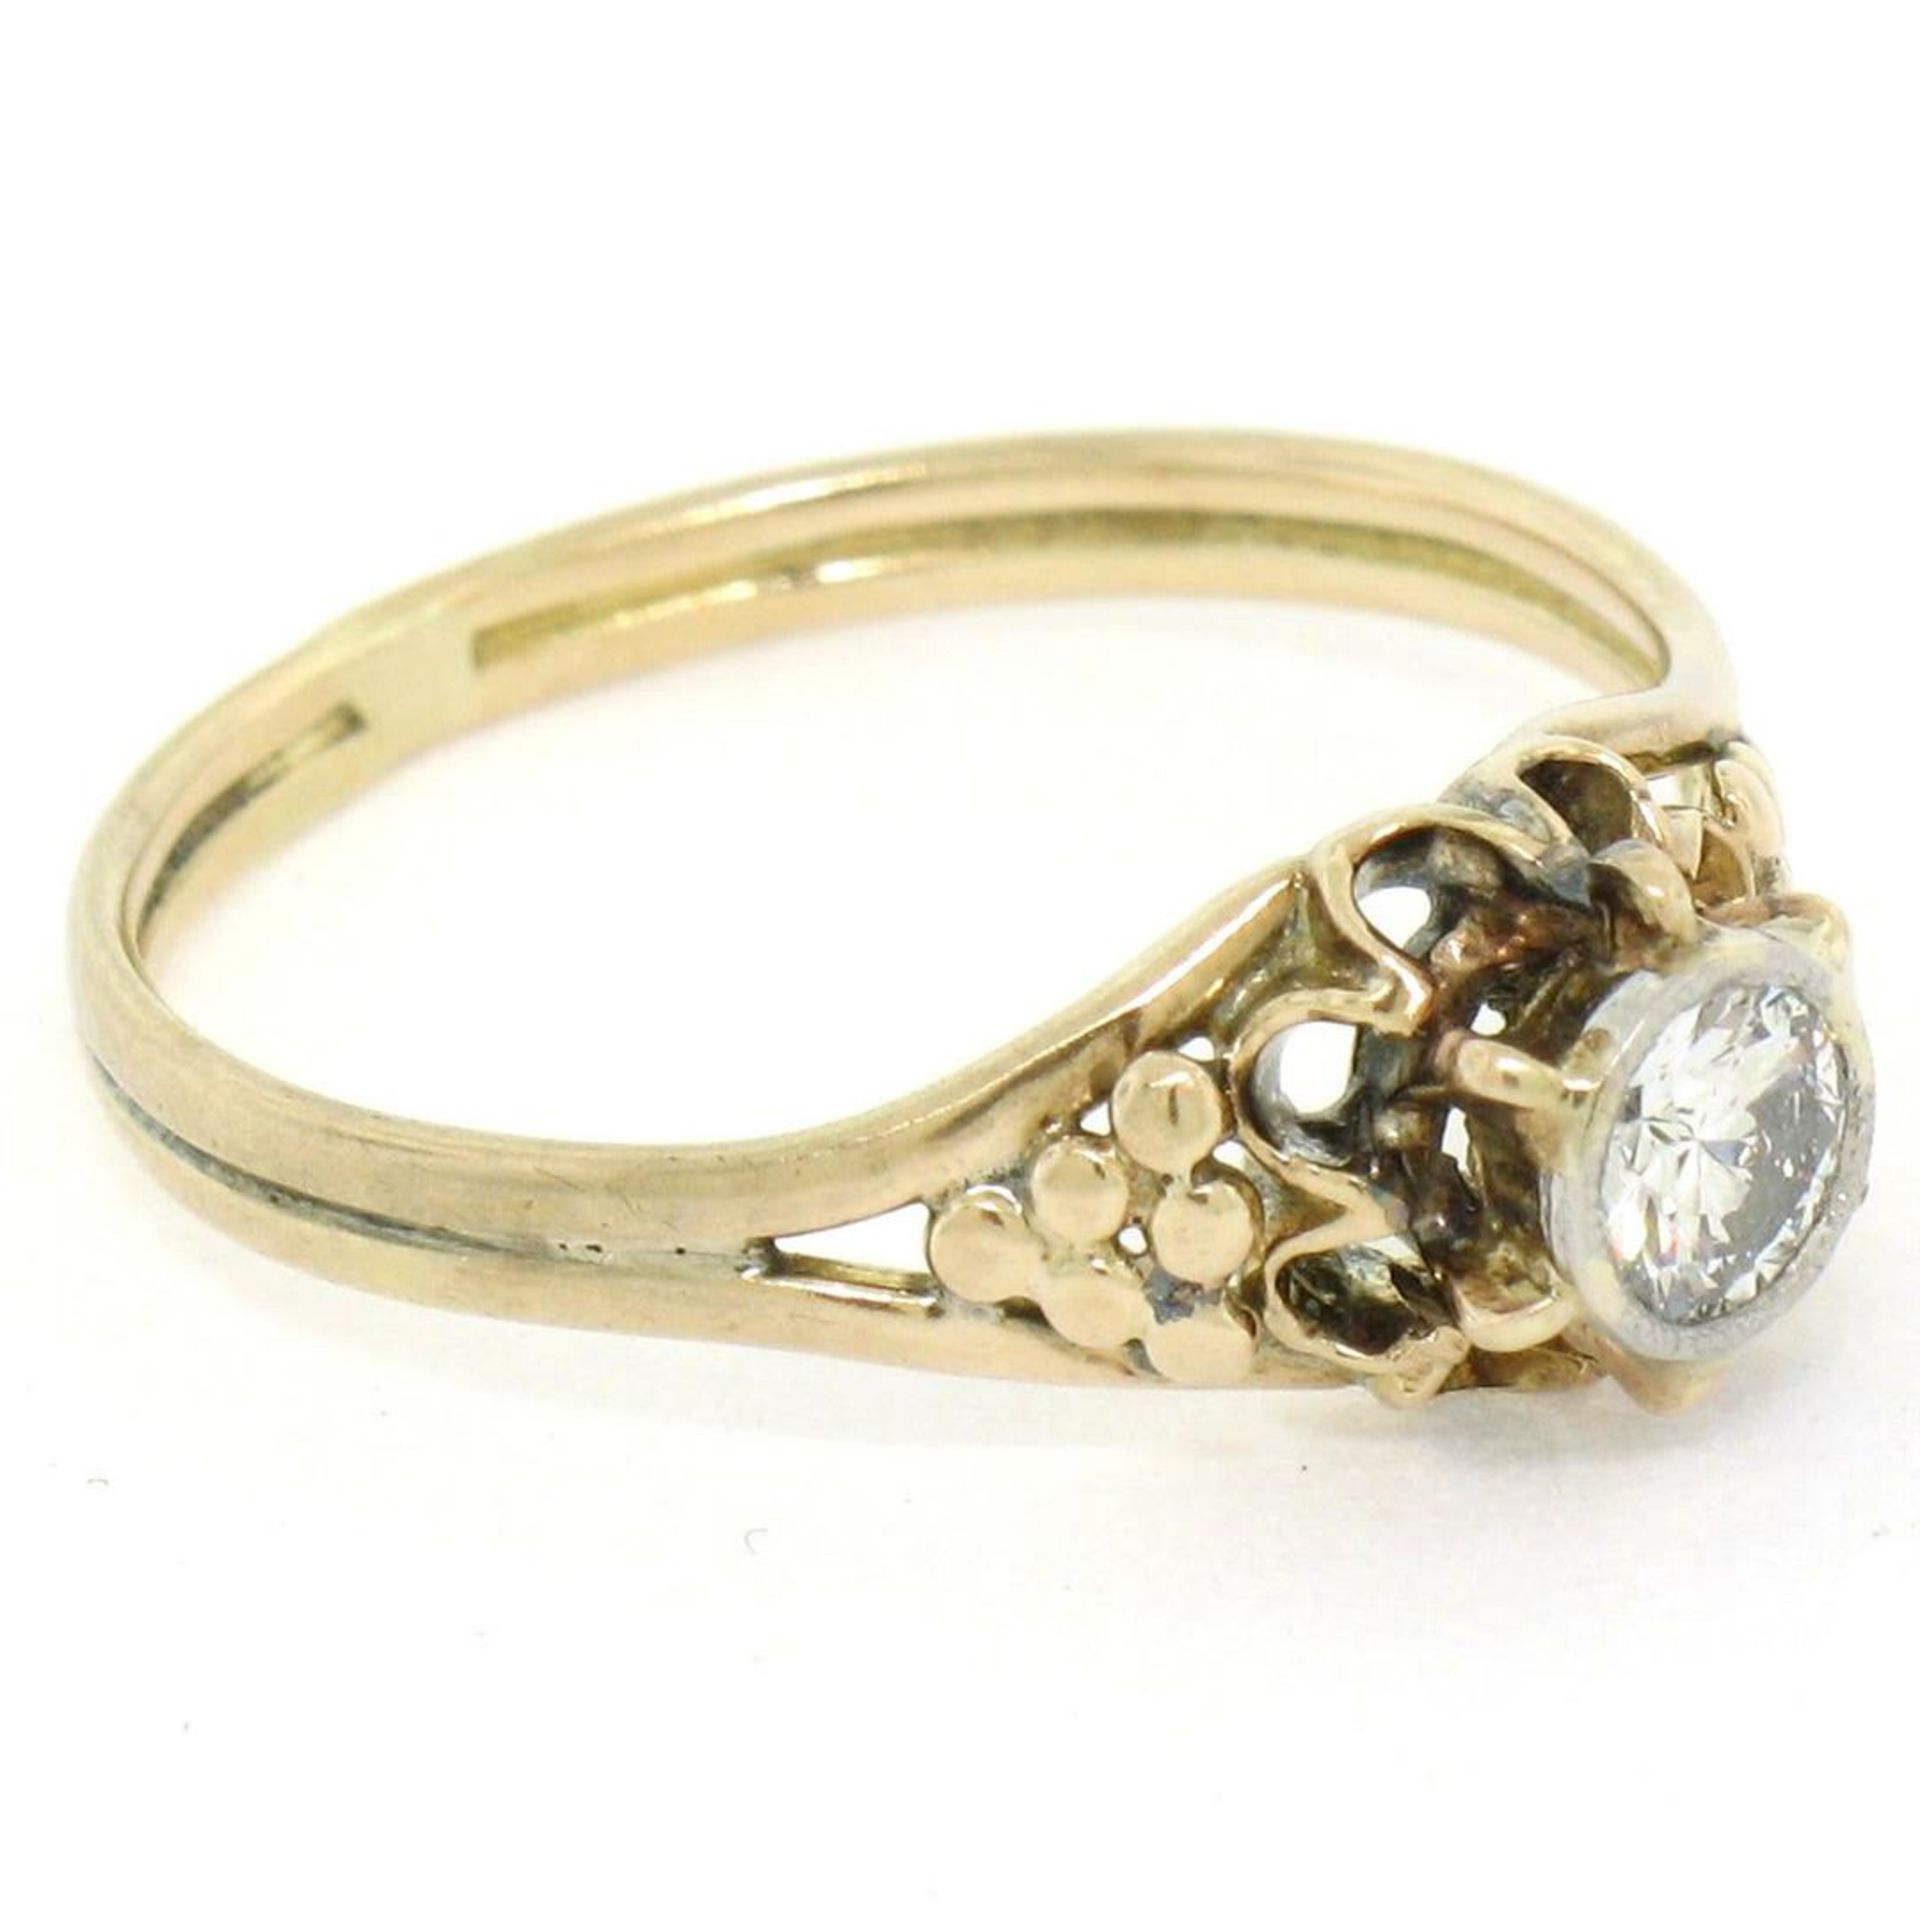 Antique 14kt Yellow and White Gold 0.30 ct Diamond Solitaire Ring - Image 5 of 8